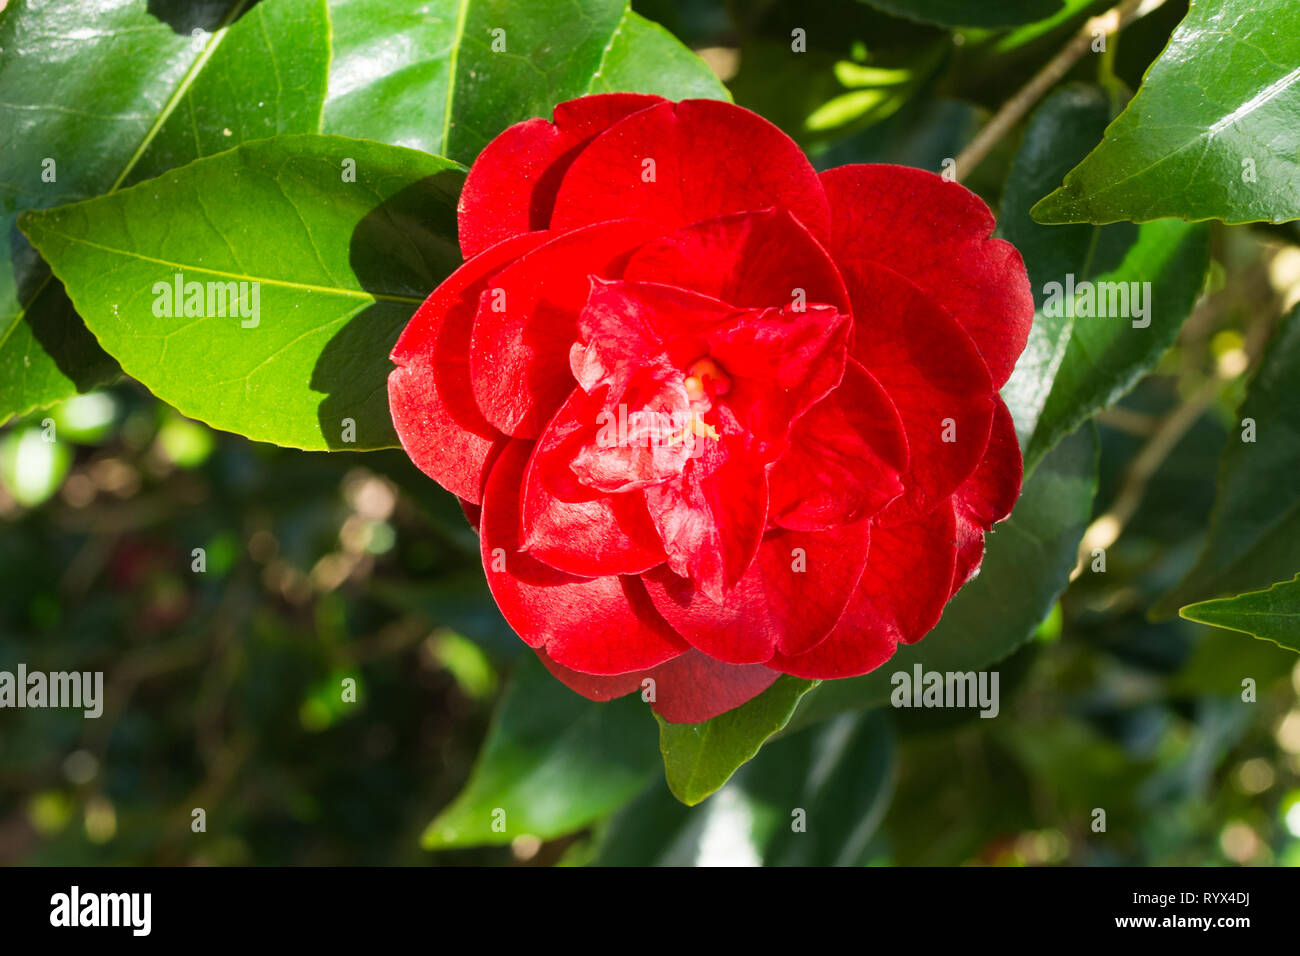 Camellia japonica 'konronkoku' with red blooms or flowers during march, early spring, in an English garden, UK Stock Photo